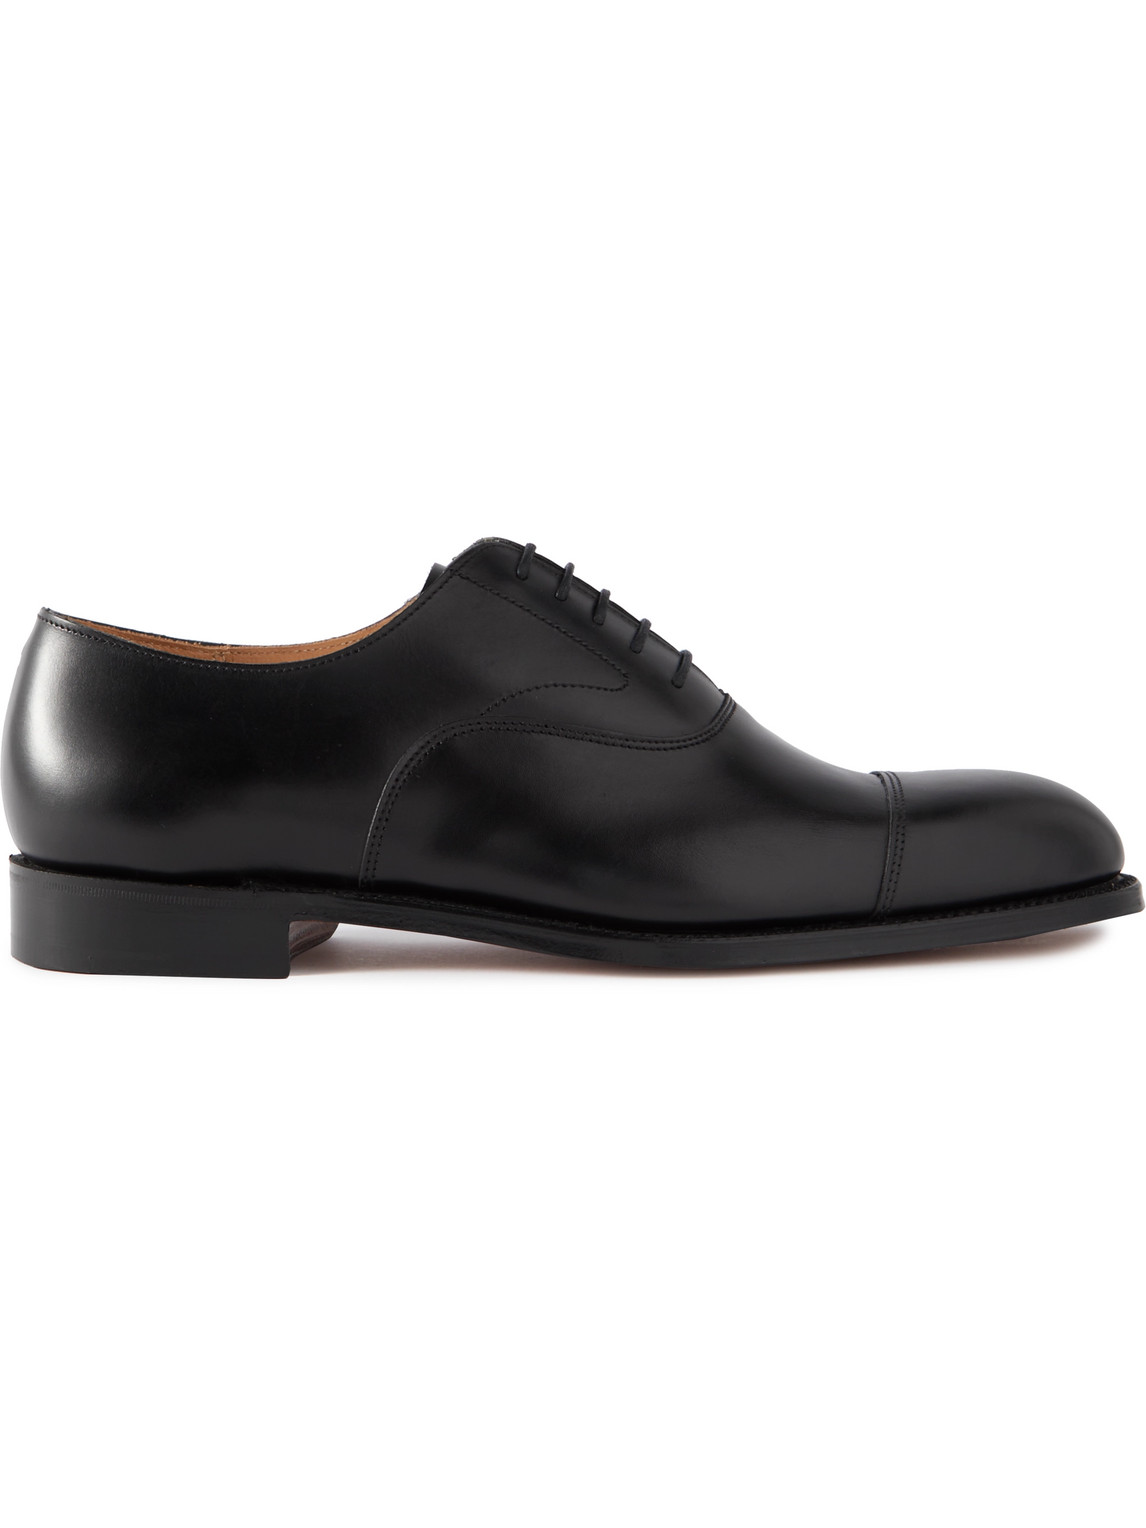 Cambridge Leather Oxford Shoes